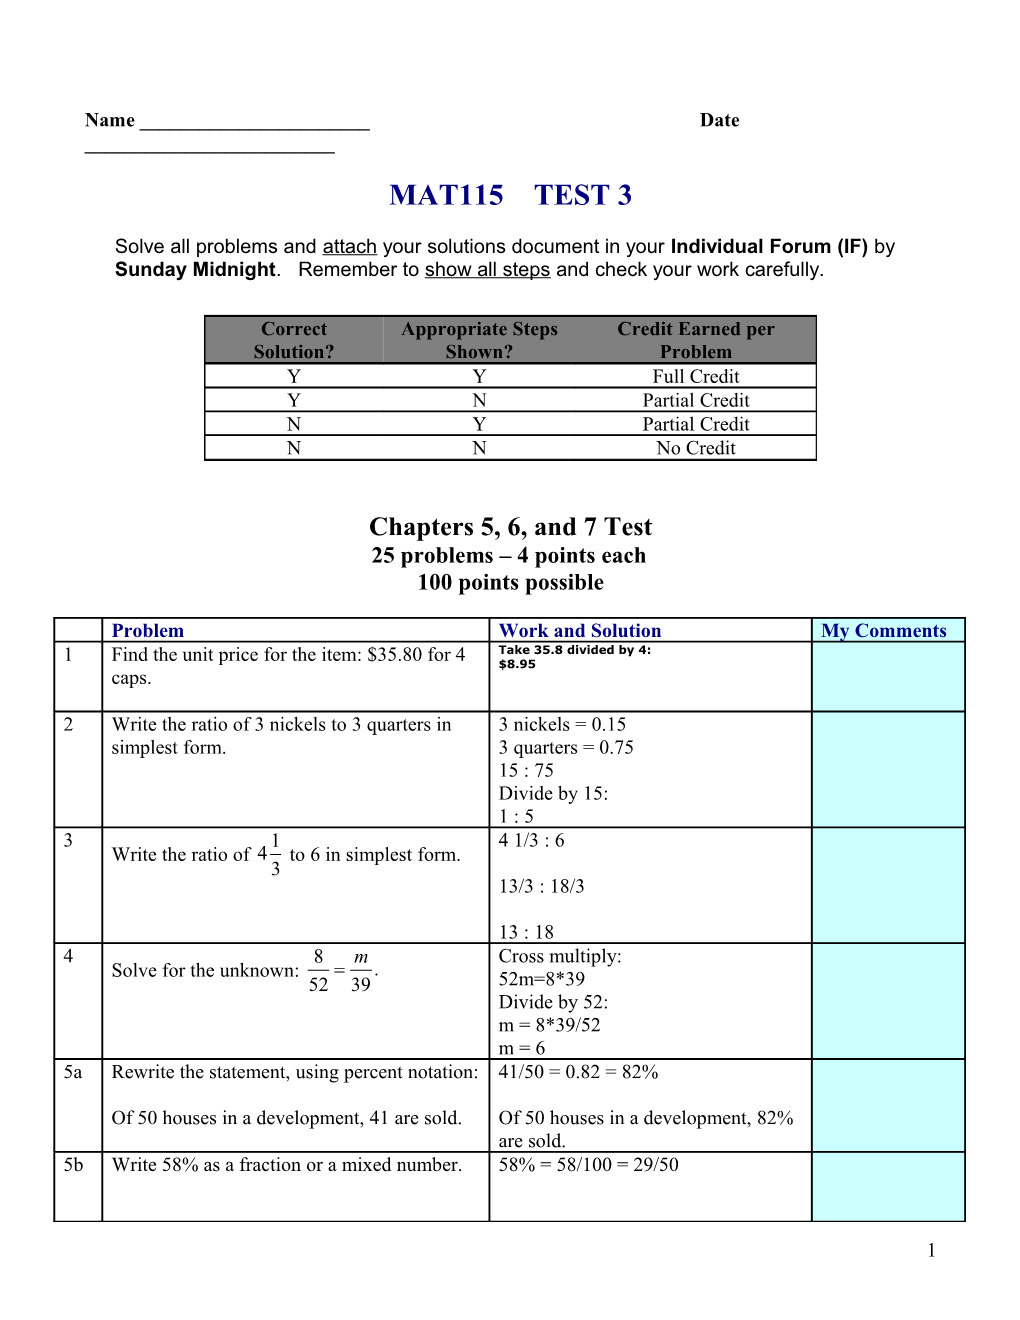 Chapters 5, 6, and 7 Test